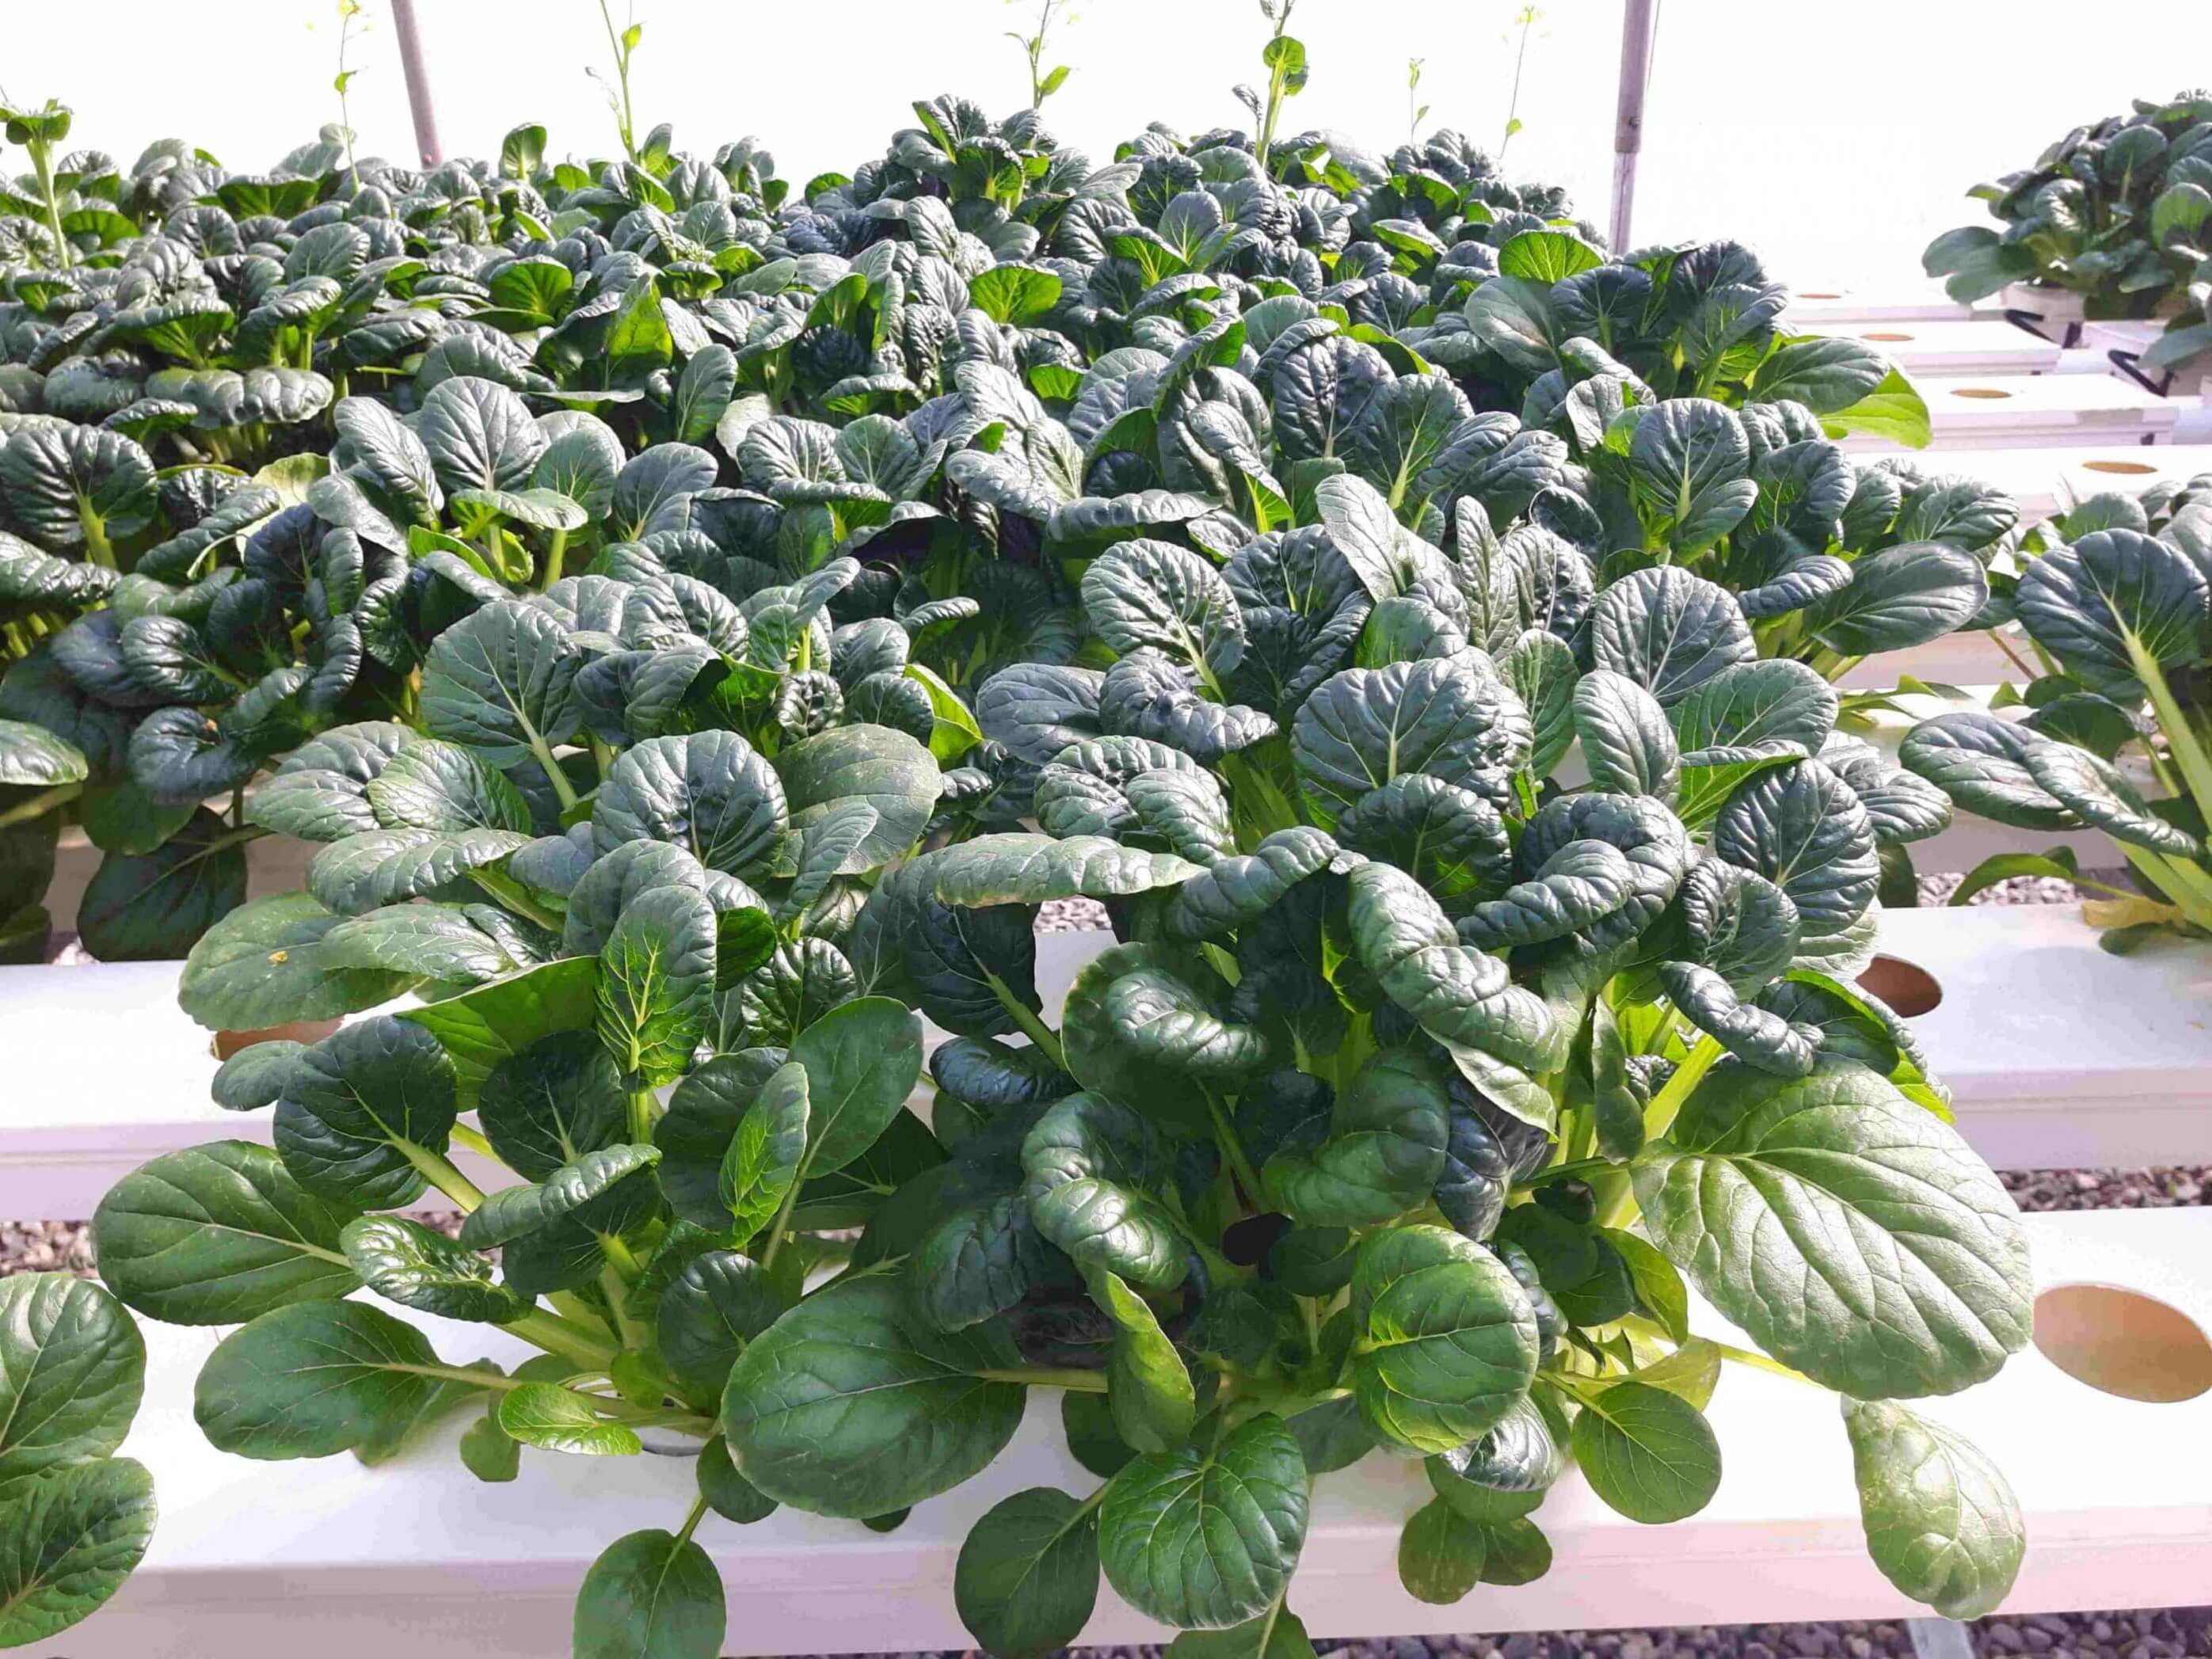 The Commercial Value That Nft Grow System Can Bring